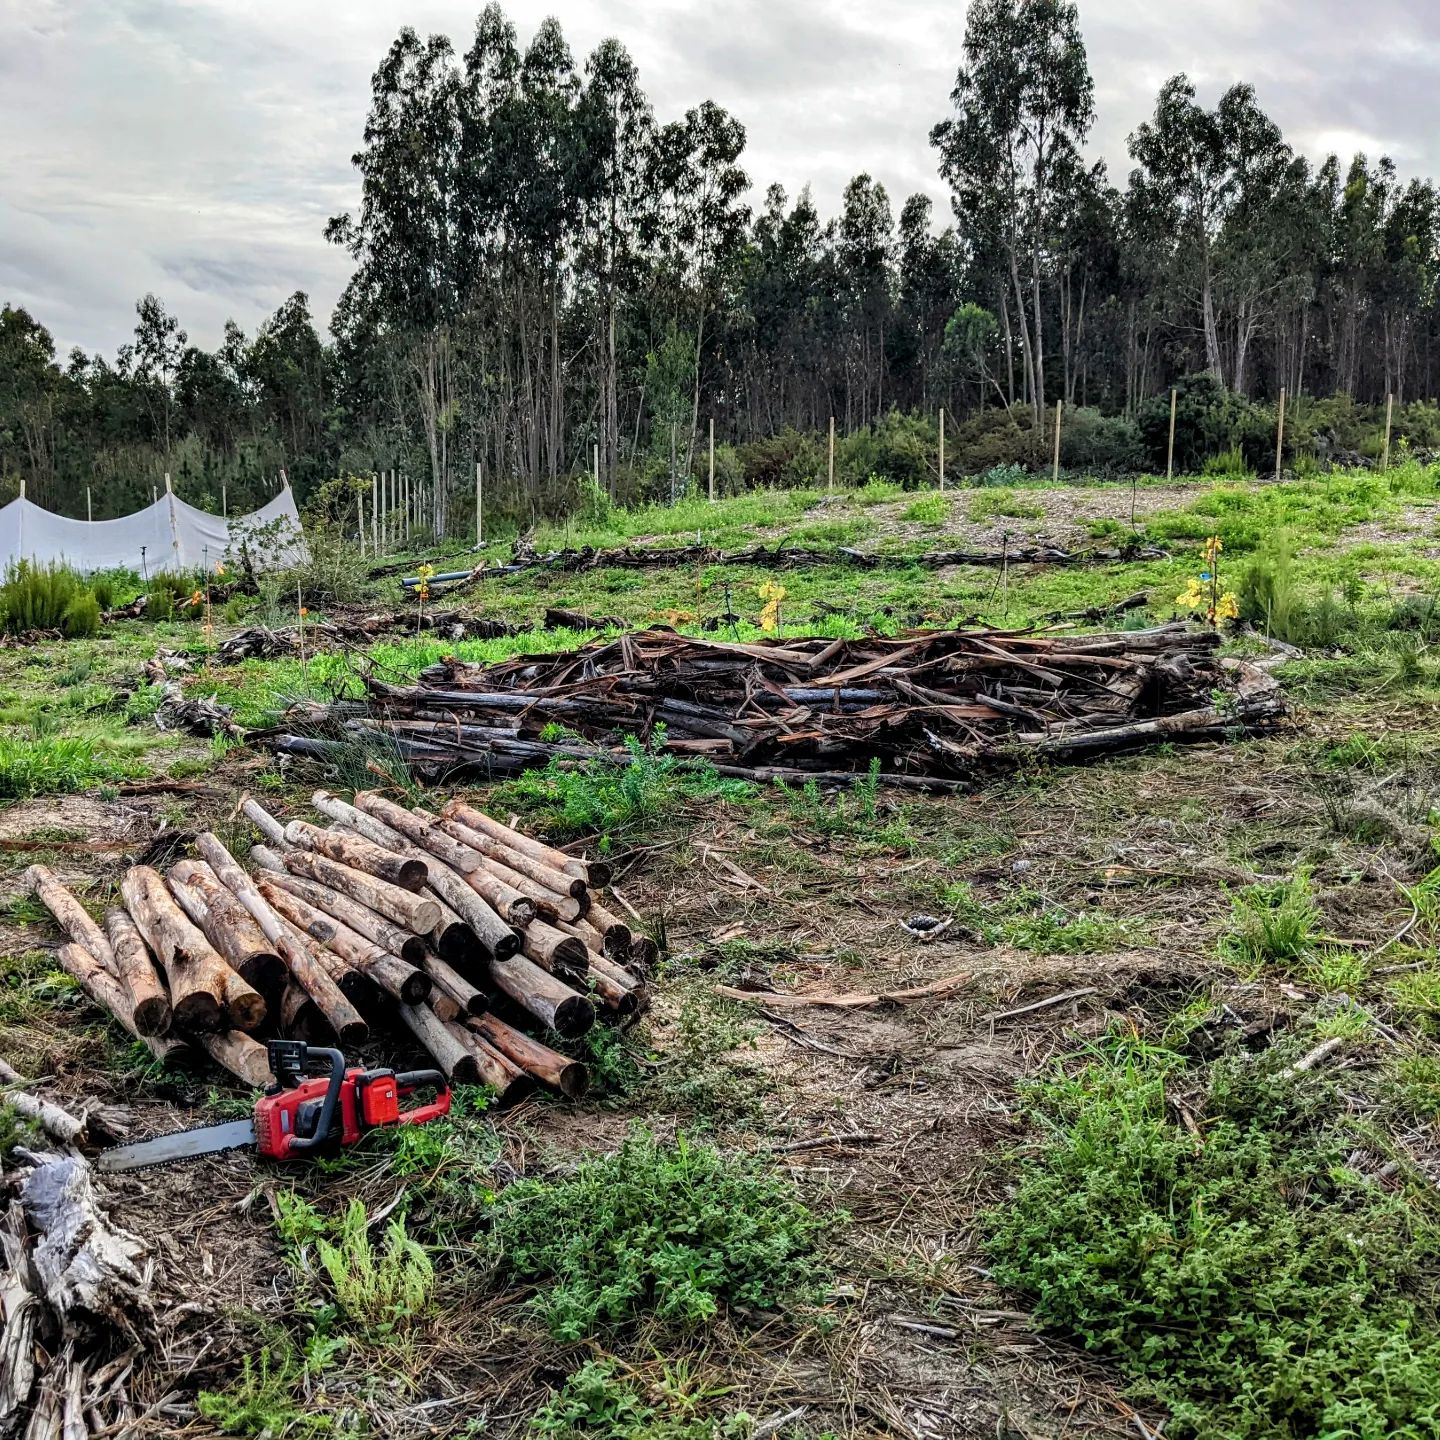 Another pile of #eucalyptus logs processed, with the discarded bits used to make the base of a #hugelkultur #windbreak for the social gathering area